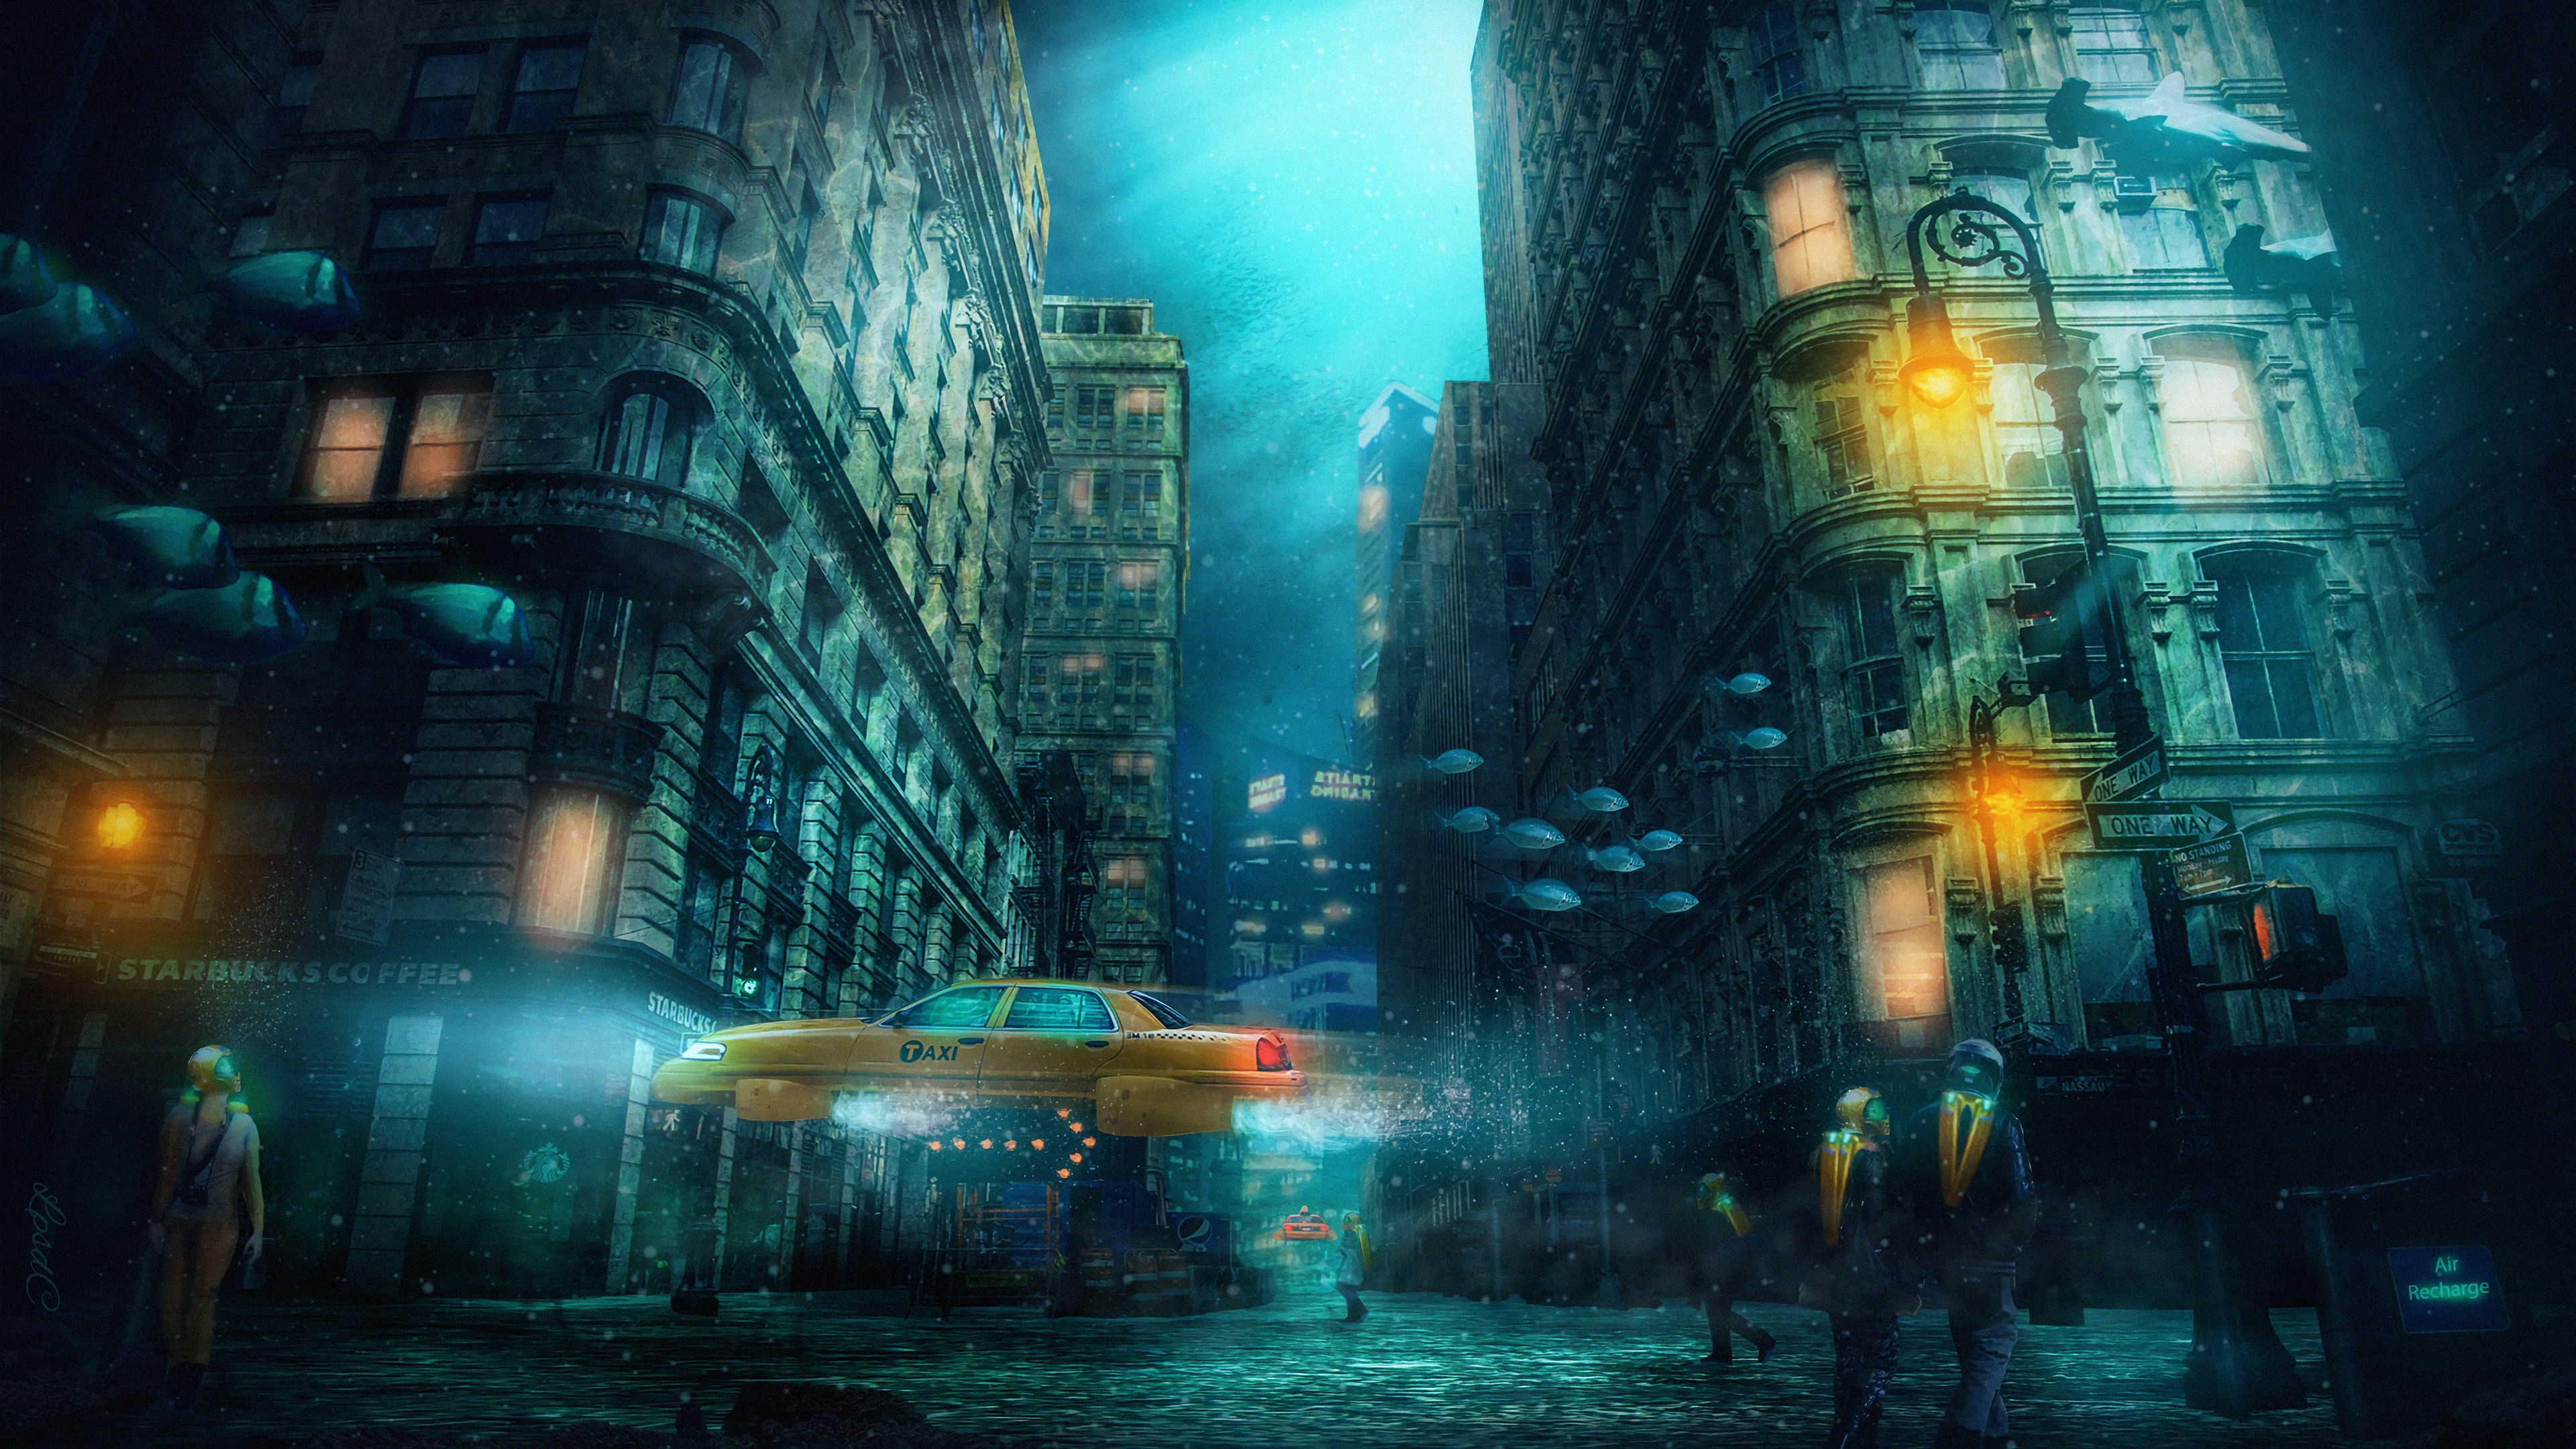 Underwater City 4k, HD Artist, 4k Wallpaper, Image, Background, Photo and Picture